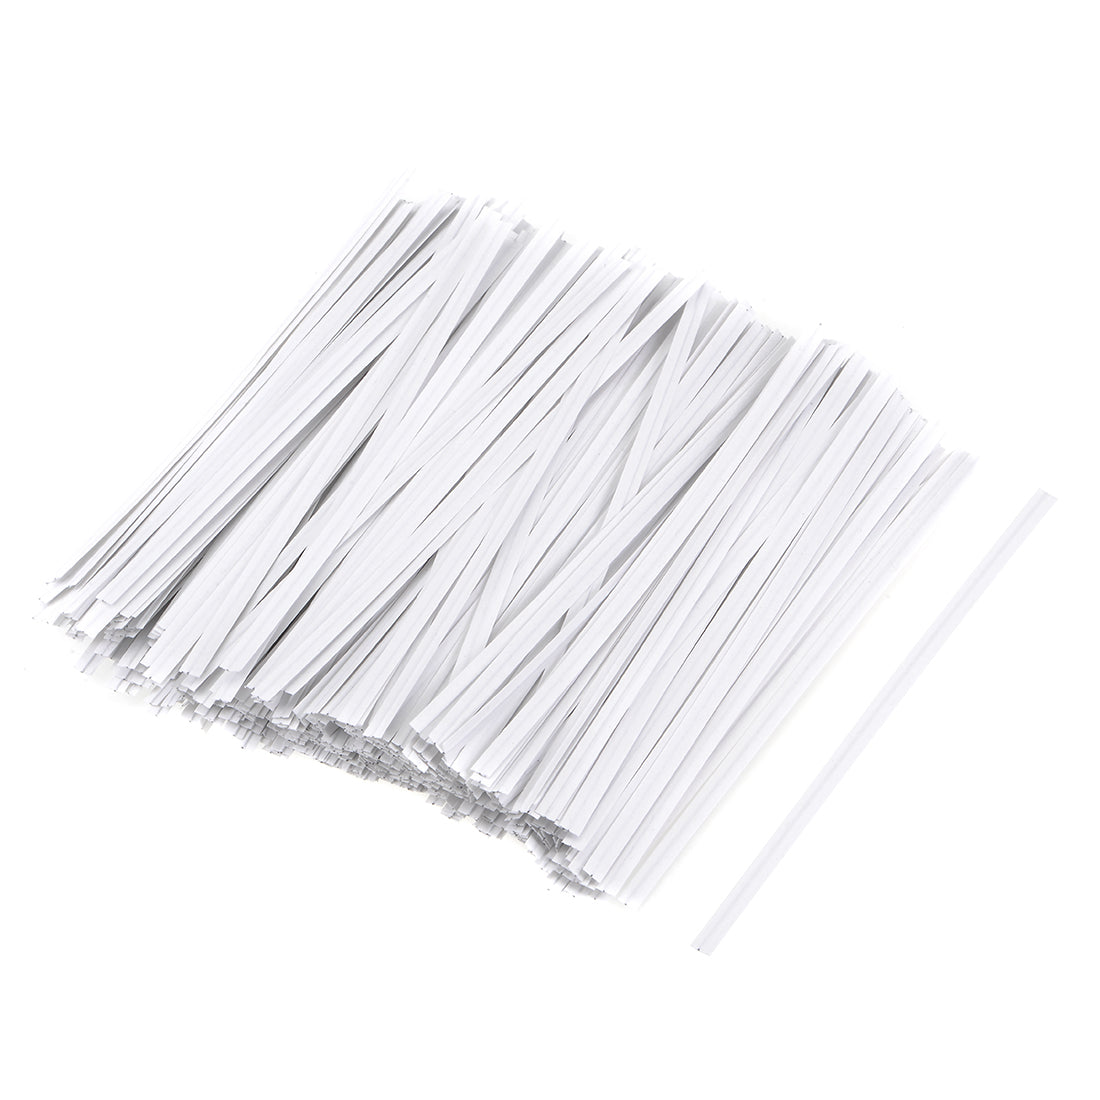 uxcell Uxcell Long Strong Twist Ties 4.7 Inches Quality  Closure Tie for Tying Gift Bags Art Craft Ties Manage Cords White 200pcs